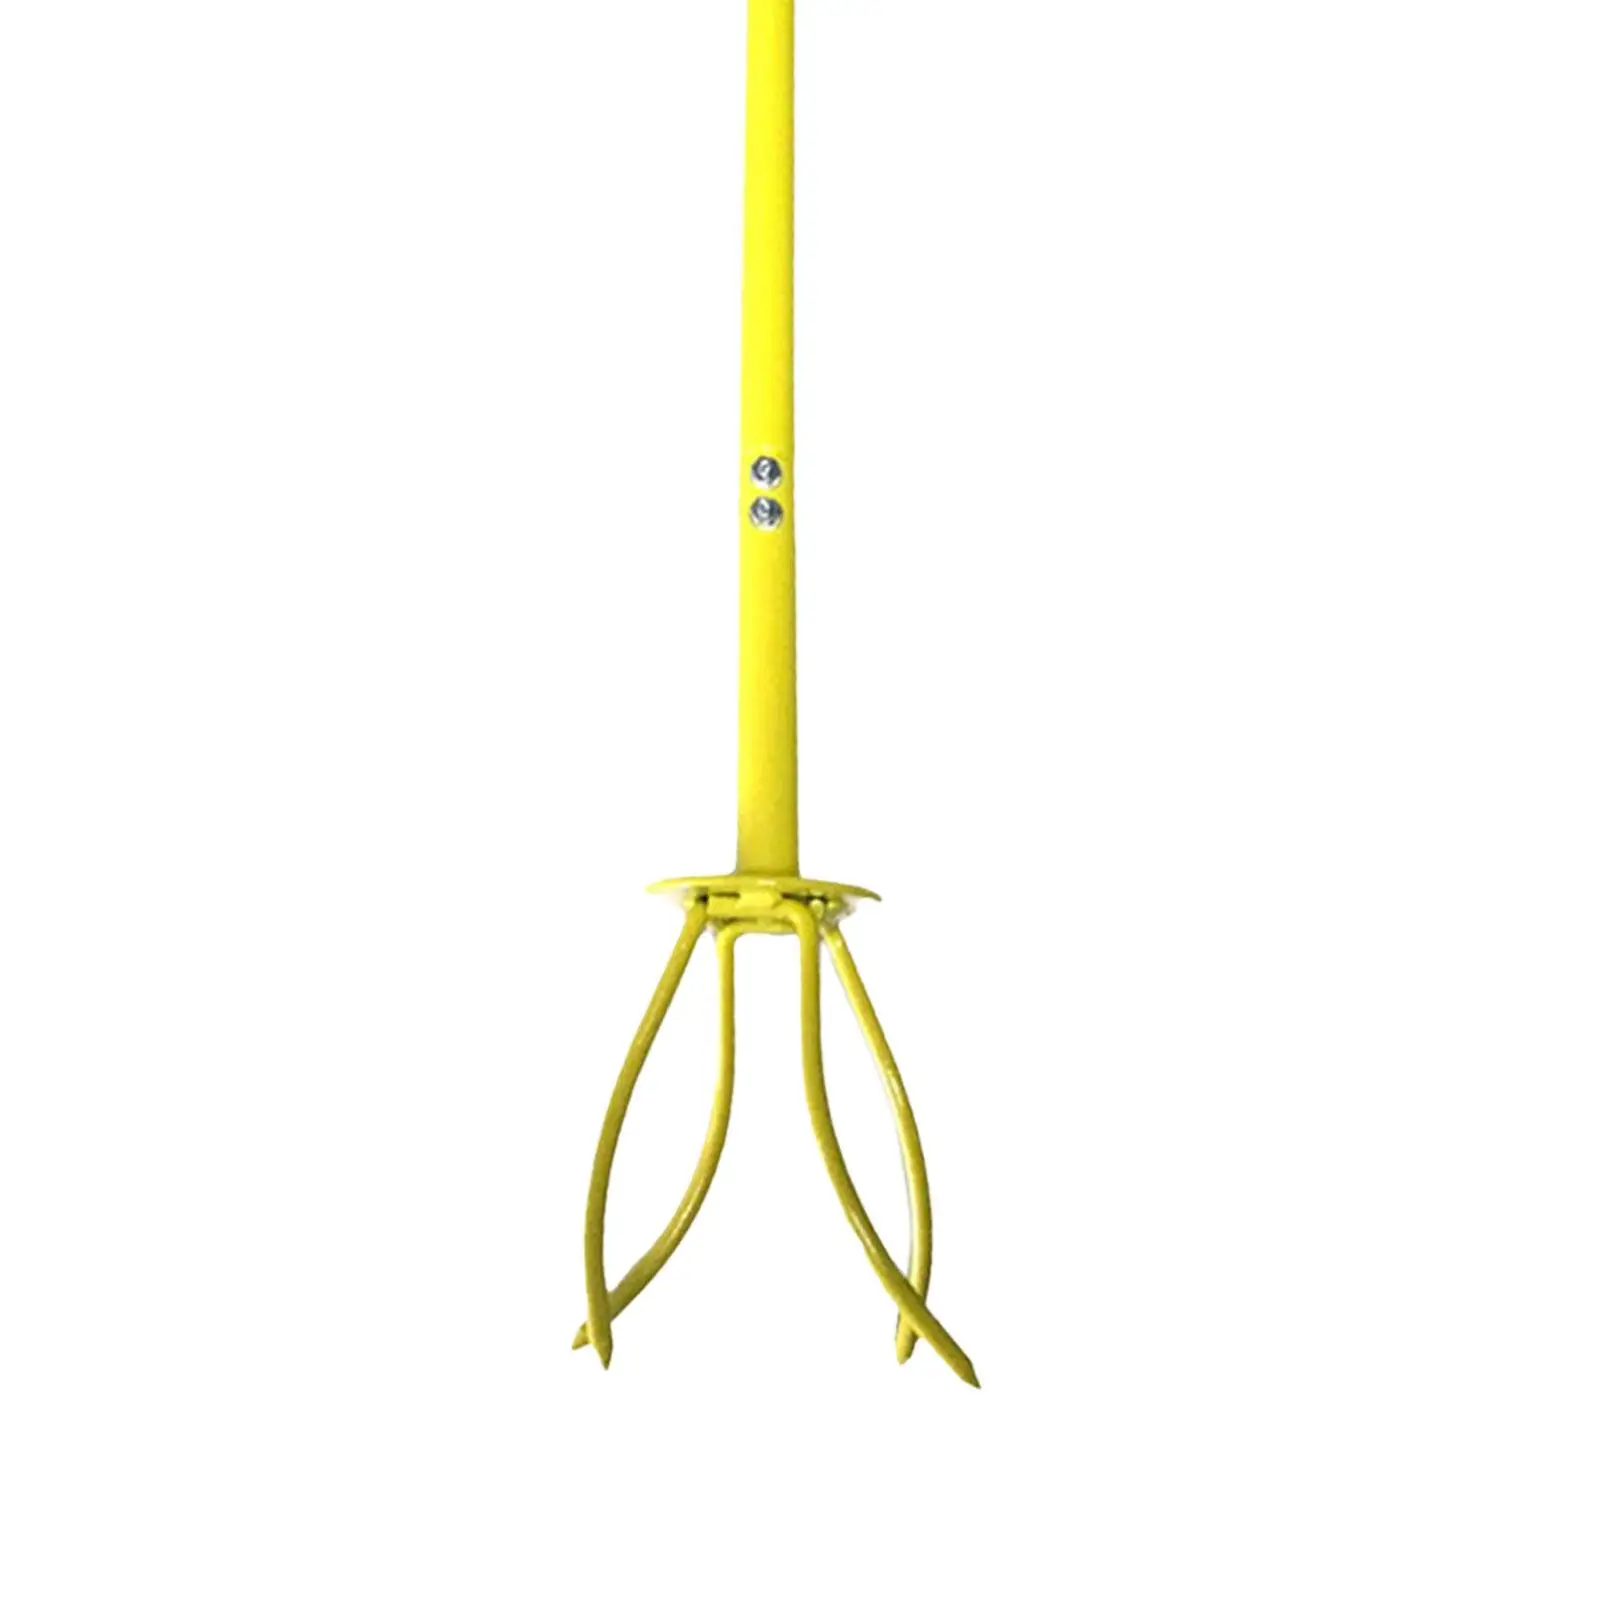 Manual Hand Tiller for Narrow and Wide Areas Rugged Detachable Durable T Shaped Handle Manual Soil Grabber Twist Tiller